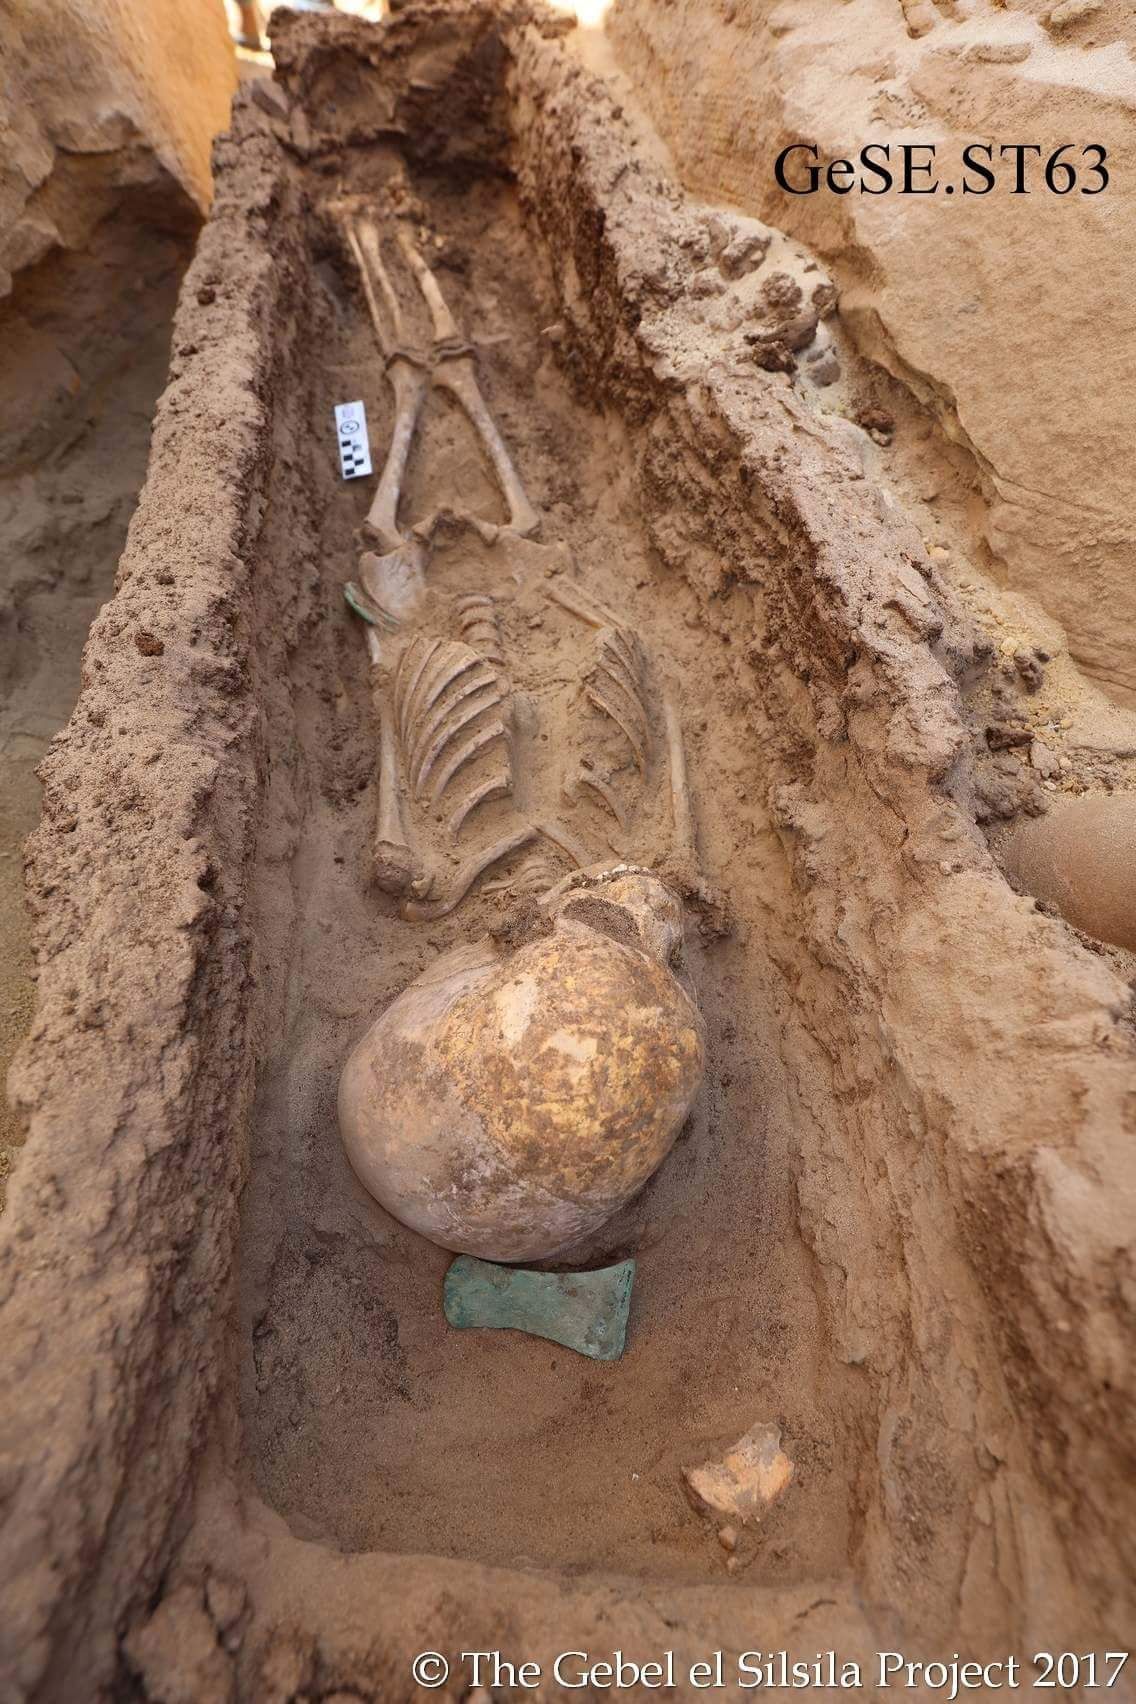 Photos: Children's Graves Discovered in Ancient Egypt | Live Science